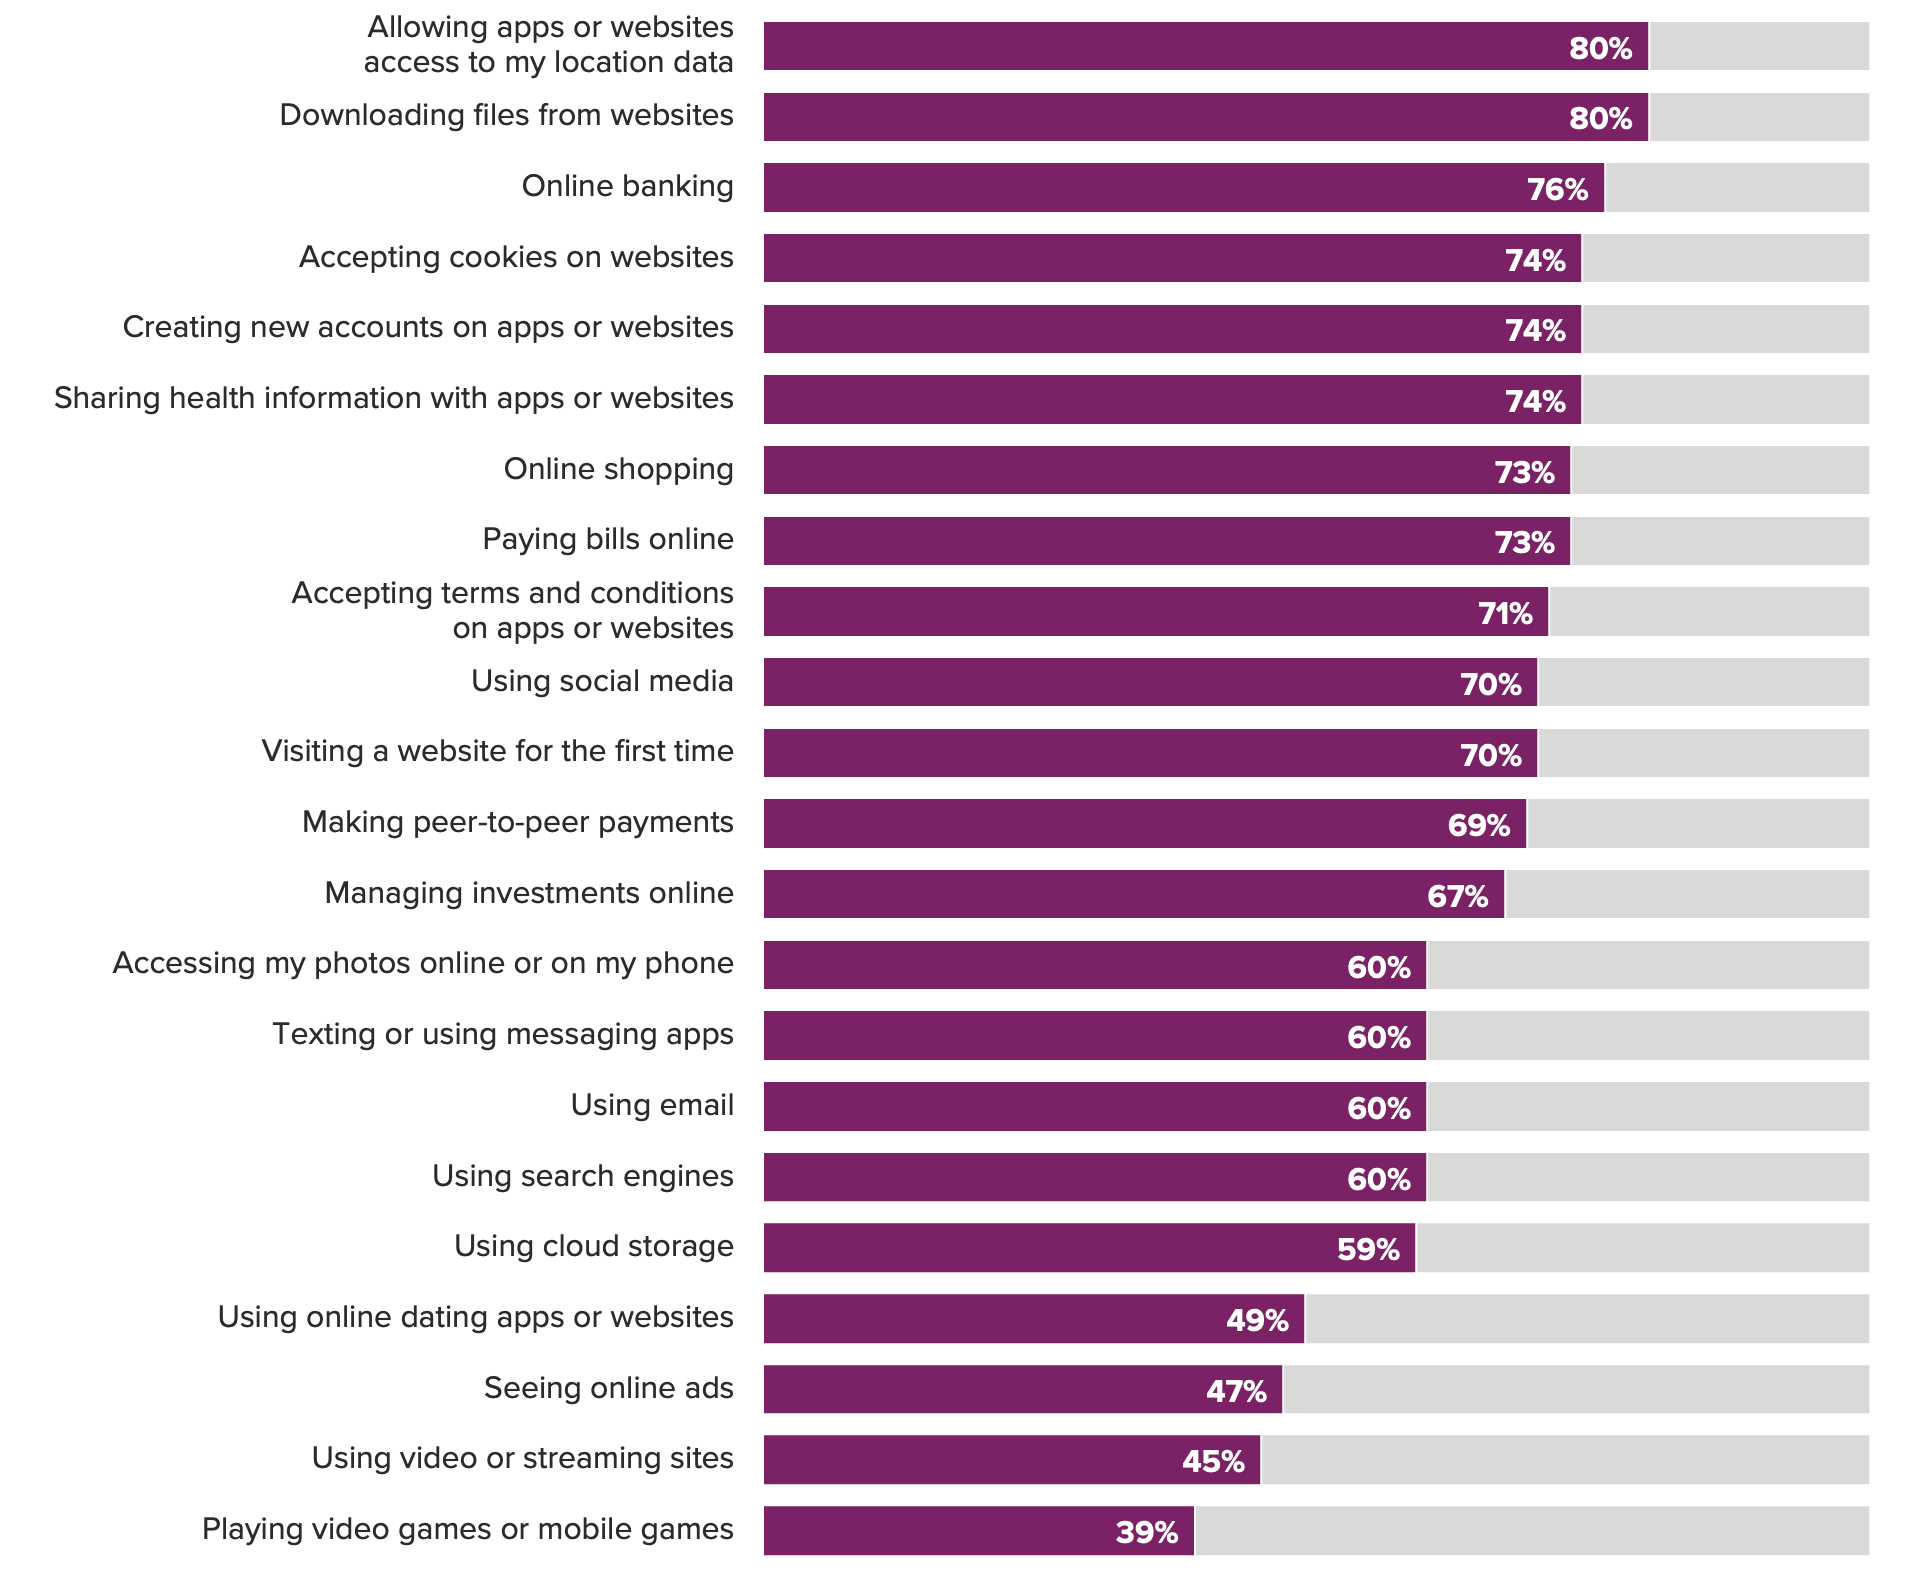 Bar chart of respondents' concern levels about privacy and security in different online situations, showing the lowest concern for playing video games or mobile games.